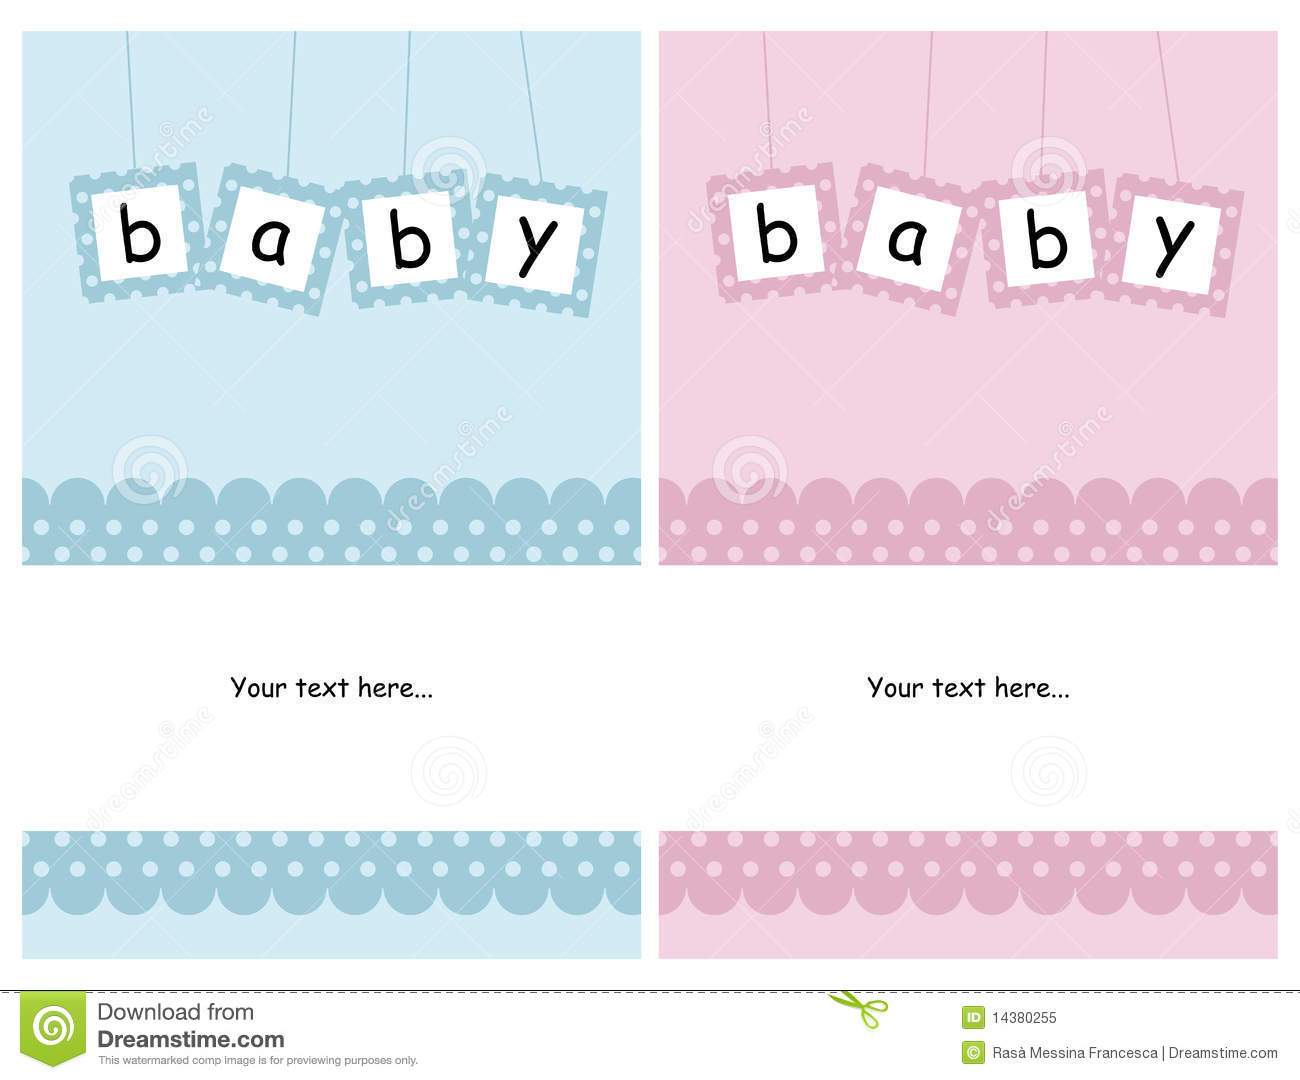 free-printable-baby-cards-templates-of-20-printable-baby-shower-invites-heritagechristiancollege